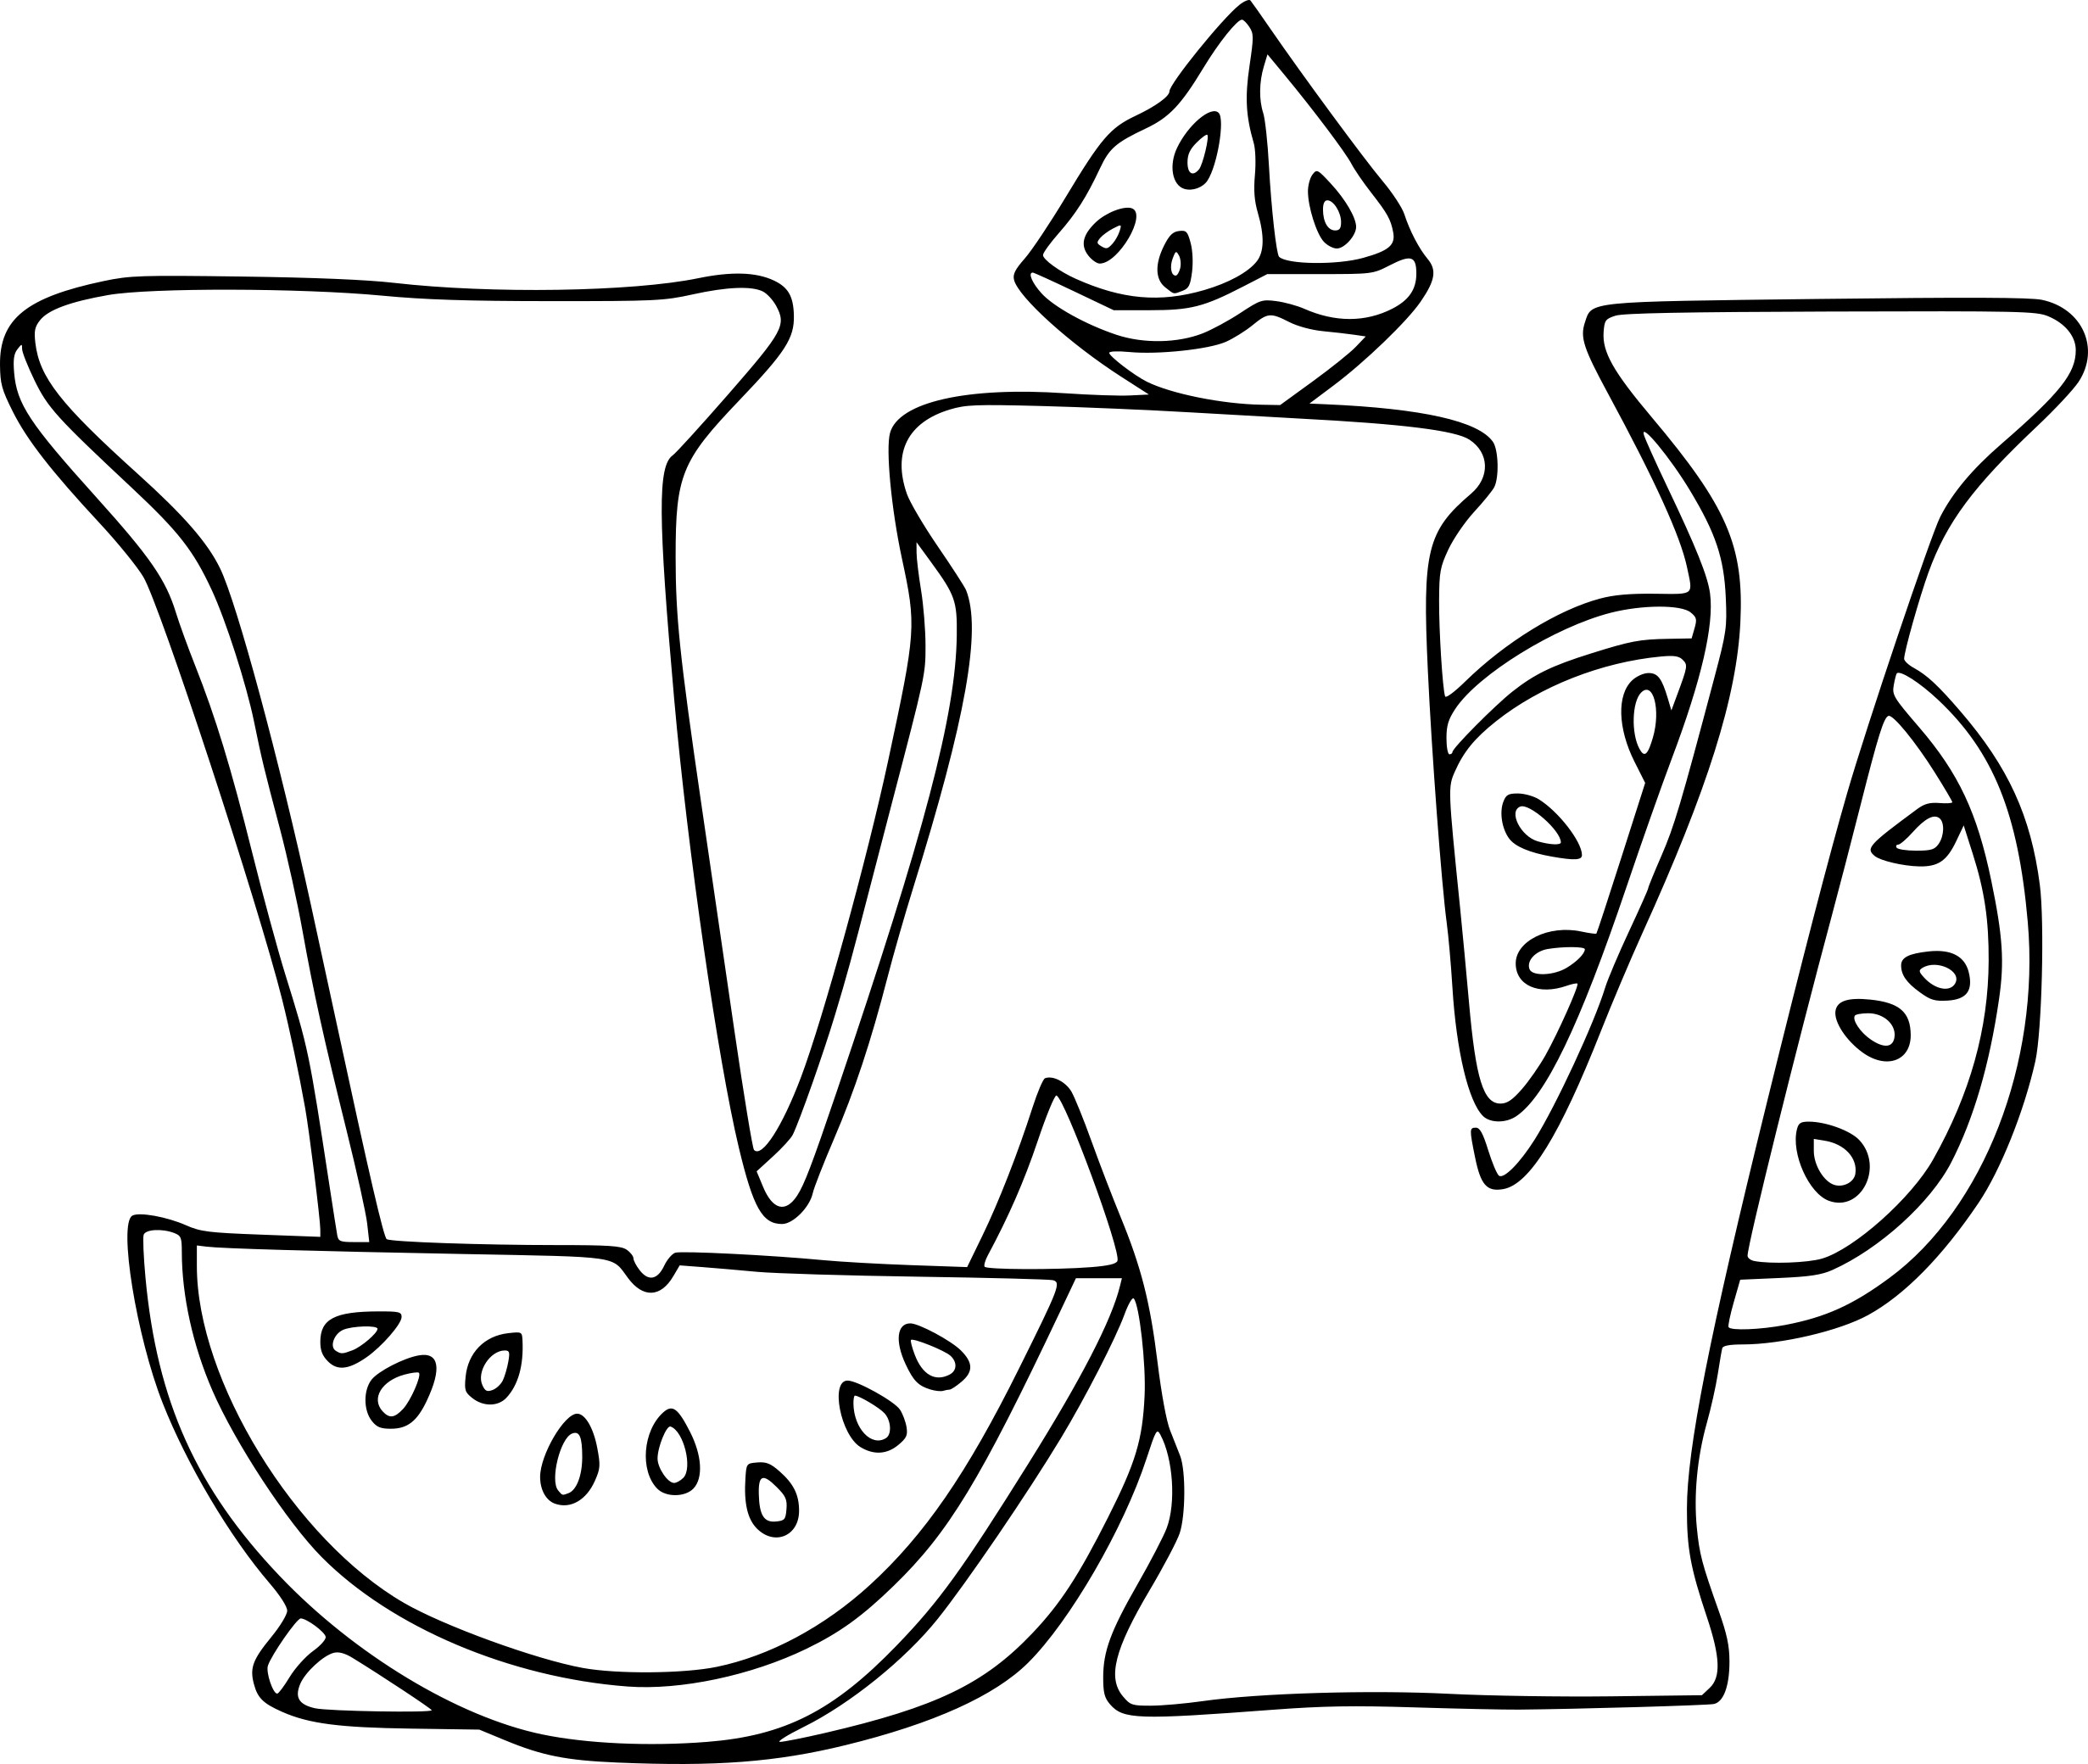 Letter W coloring page - free printable coloring pages on coloori.com